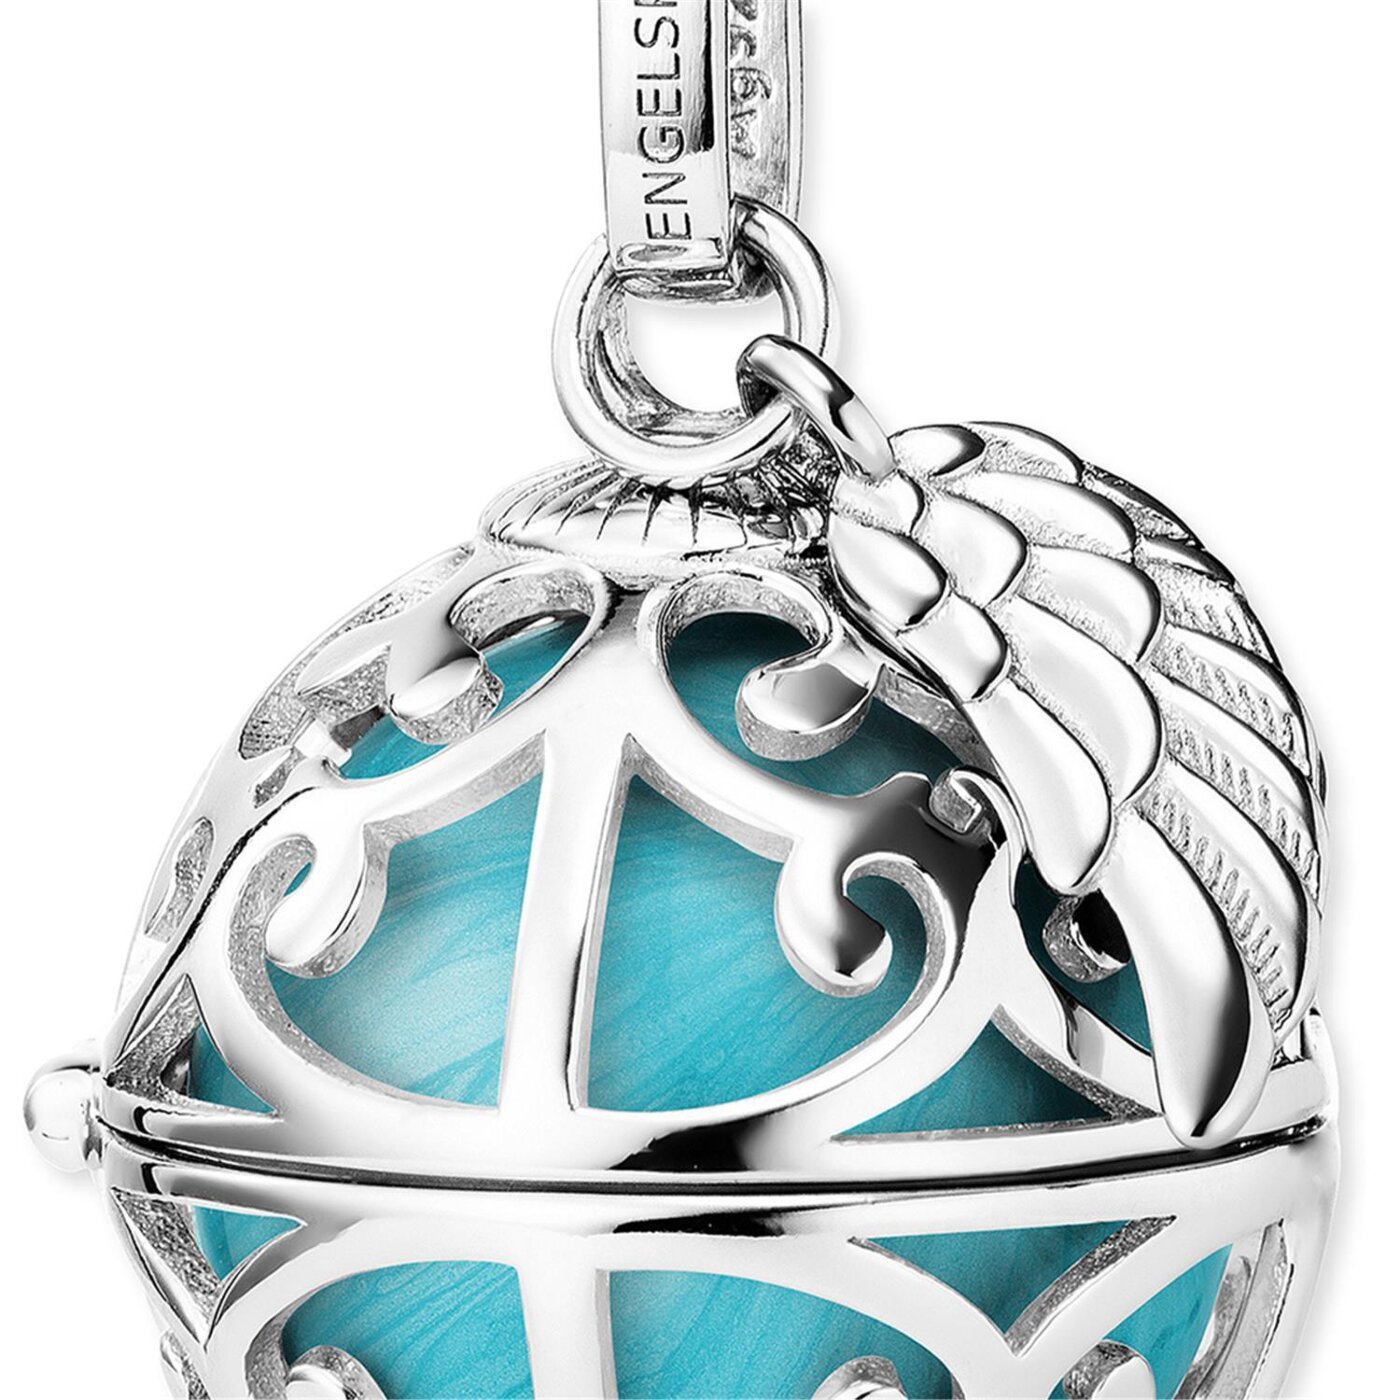 Angel caller sound ball pendant S ⌀16.5mm 925 silver mother-of-pearl turquoise